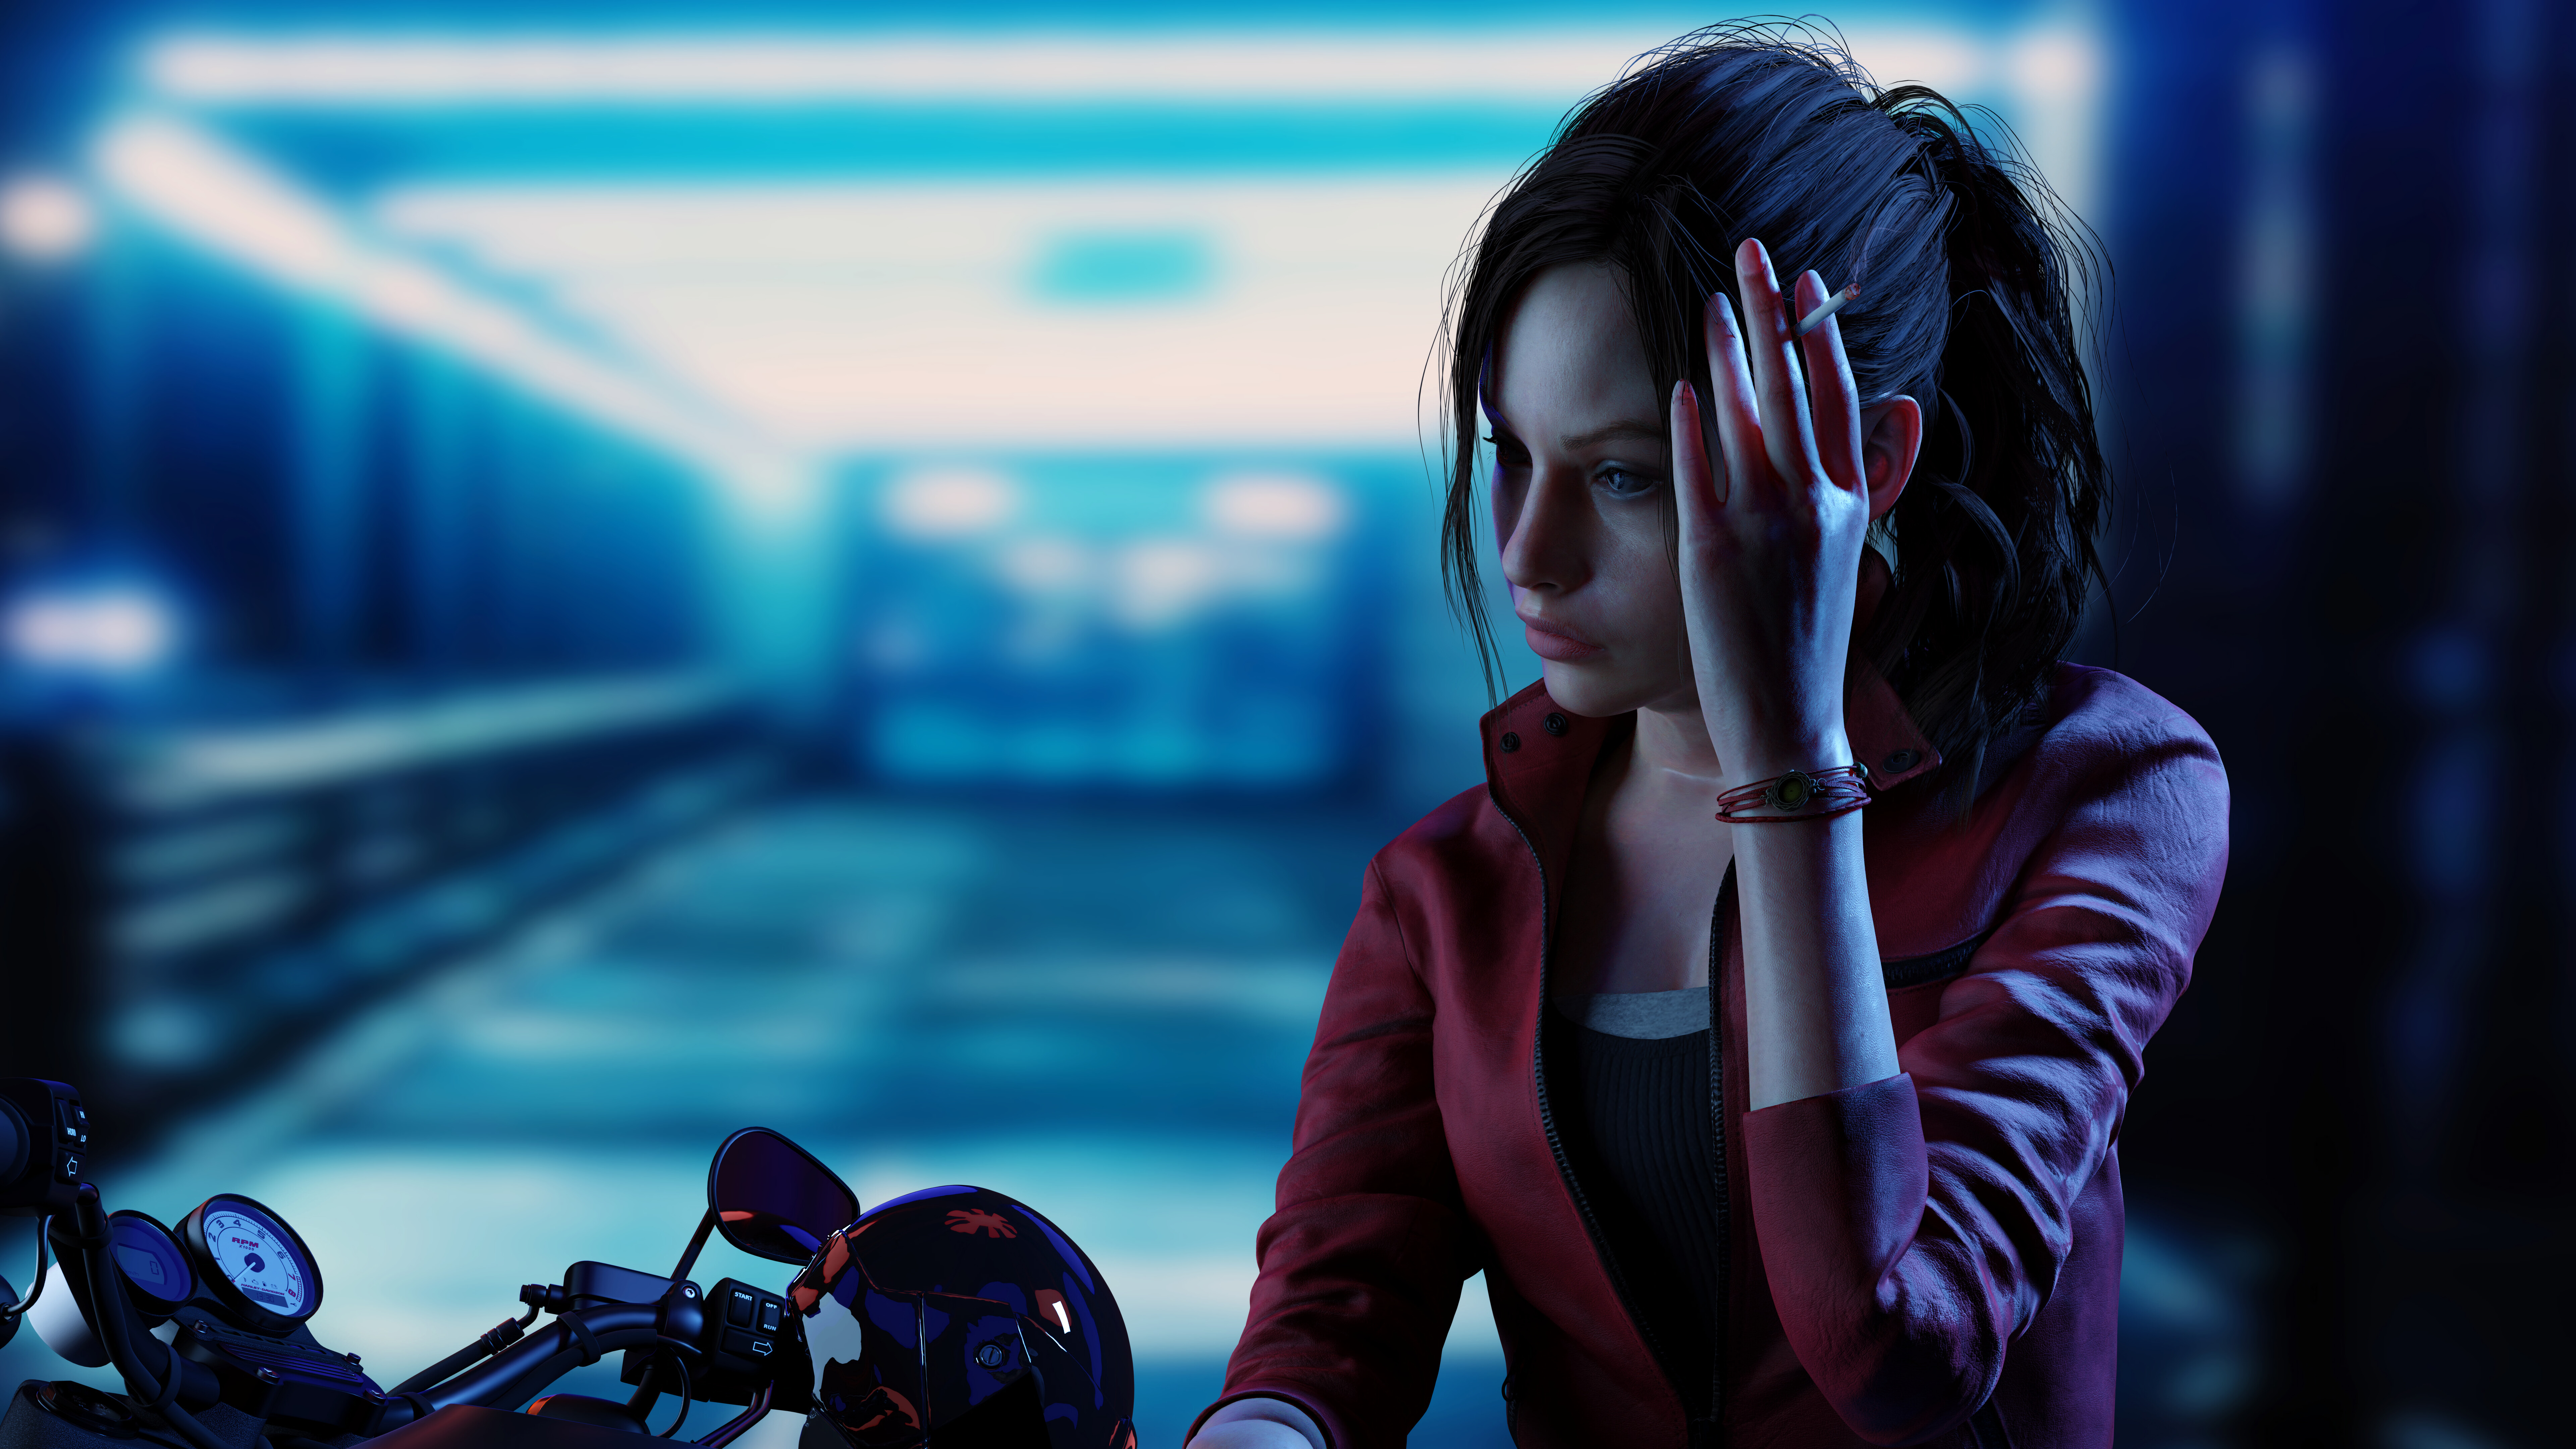 General 7680x4320 Claire Redfield Resident Evil Resident Evil 2 Resident Evil 2 Remake video game art video game characters video game girls Video Game Horror